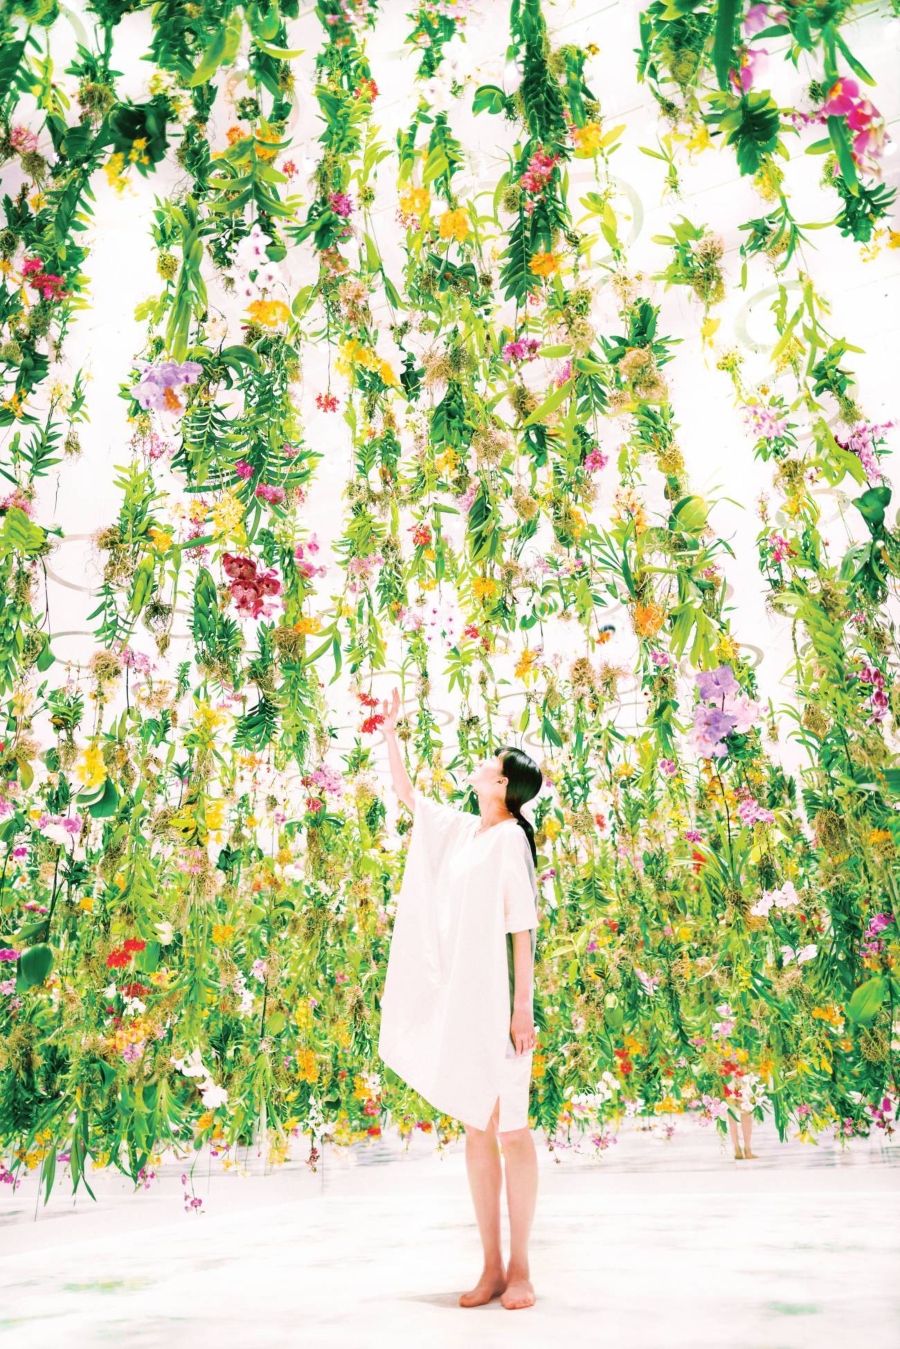 Instalación "Flowers and I are of the Same Root, the Garden and I are One" de teamLab